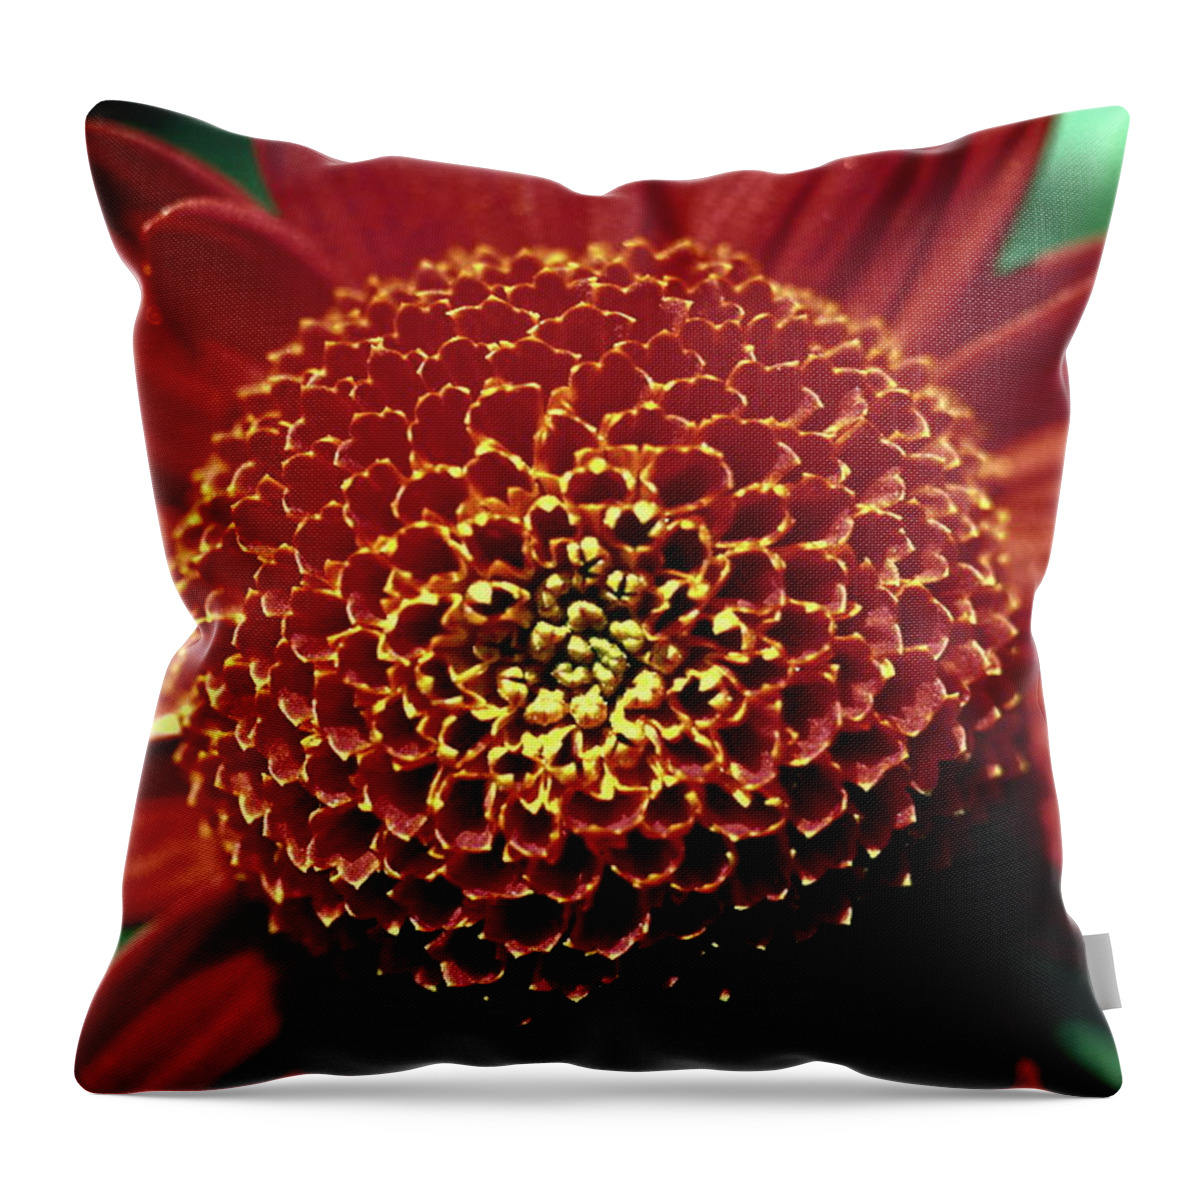 Red Mum Center; Close-up Throw Pillow featuring the photograph Red Mum Center by Sally Weigand